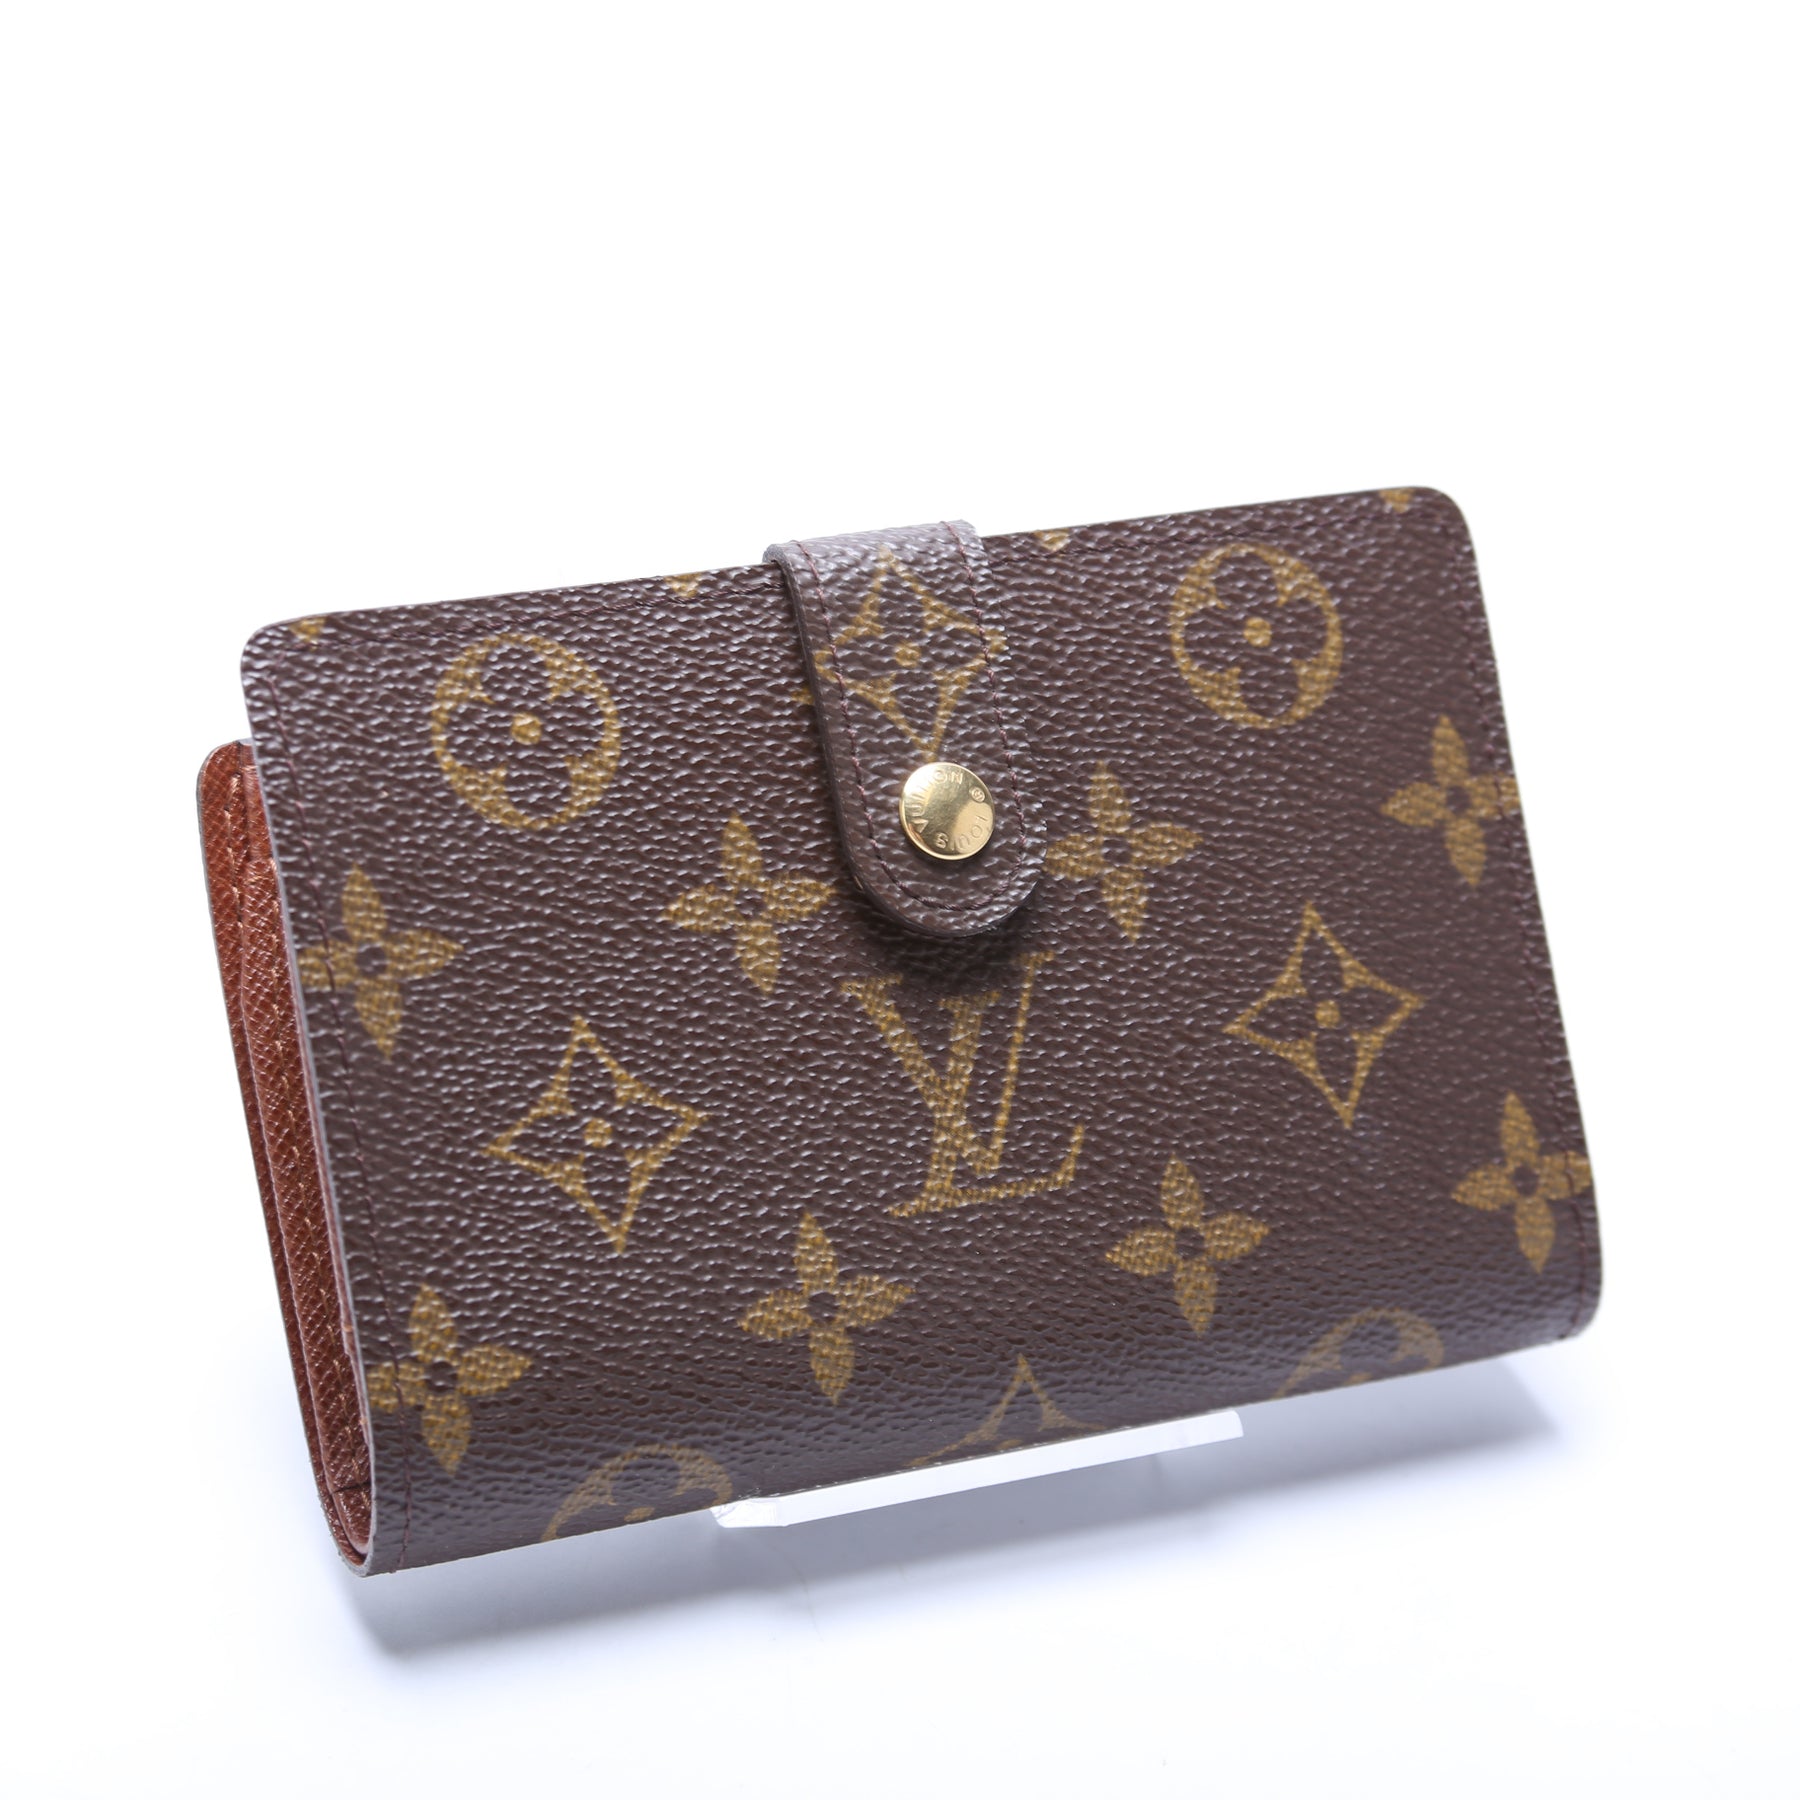 Louis Vuitton Monogram French Purse with Multiple Compartments